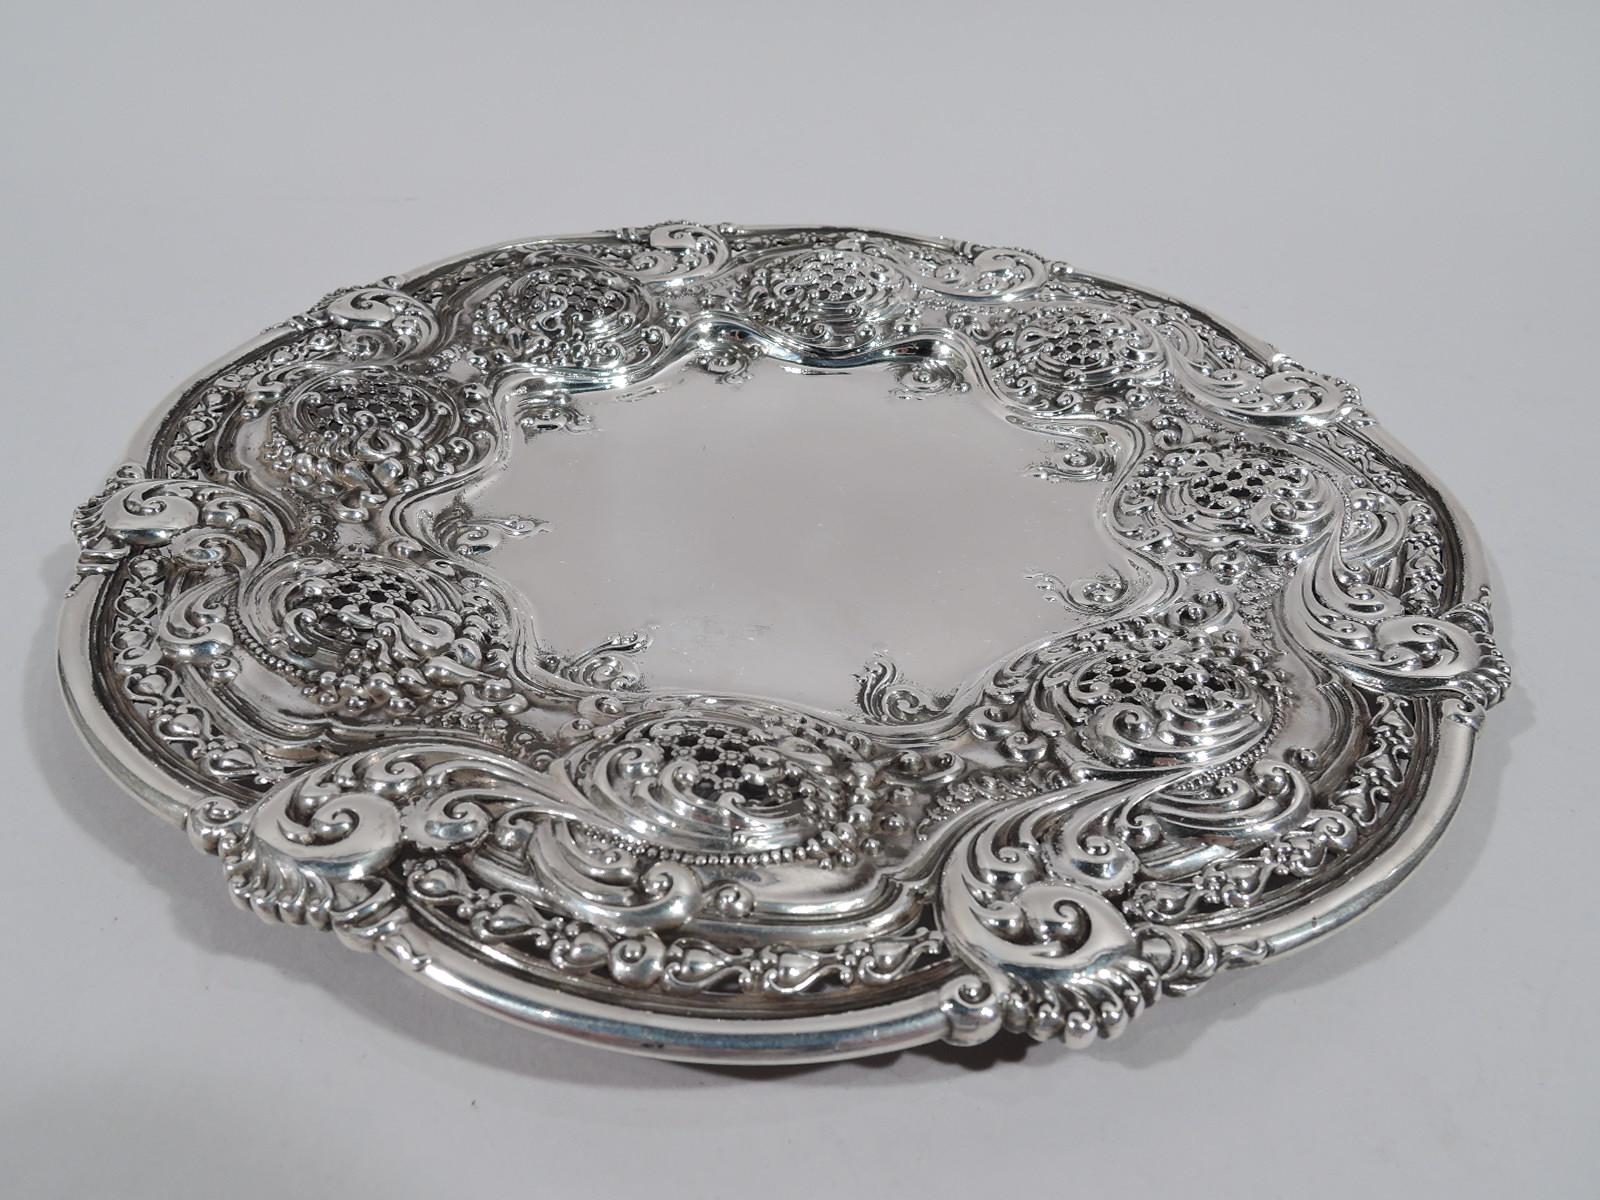 19th Century Antique Tiffany Bowl with Glass Liner on Plate from Chicago Columbian Exposition